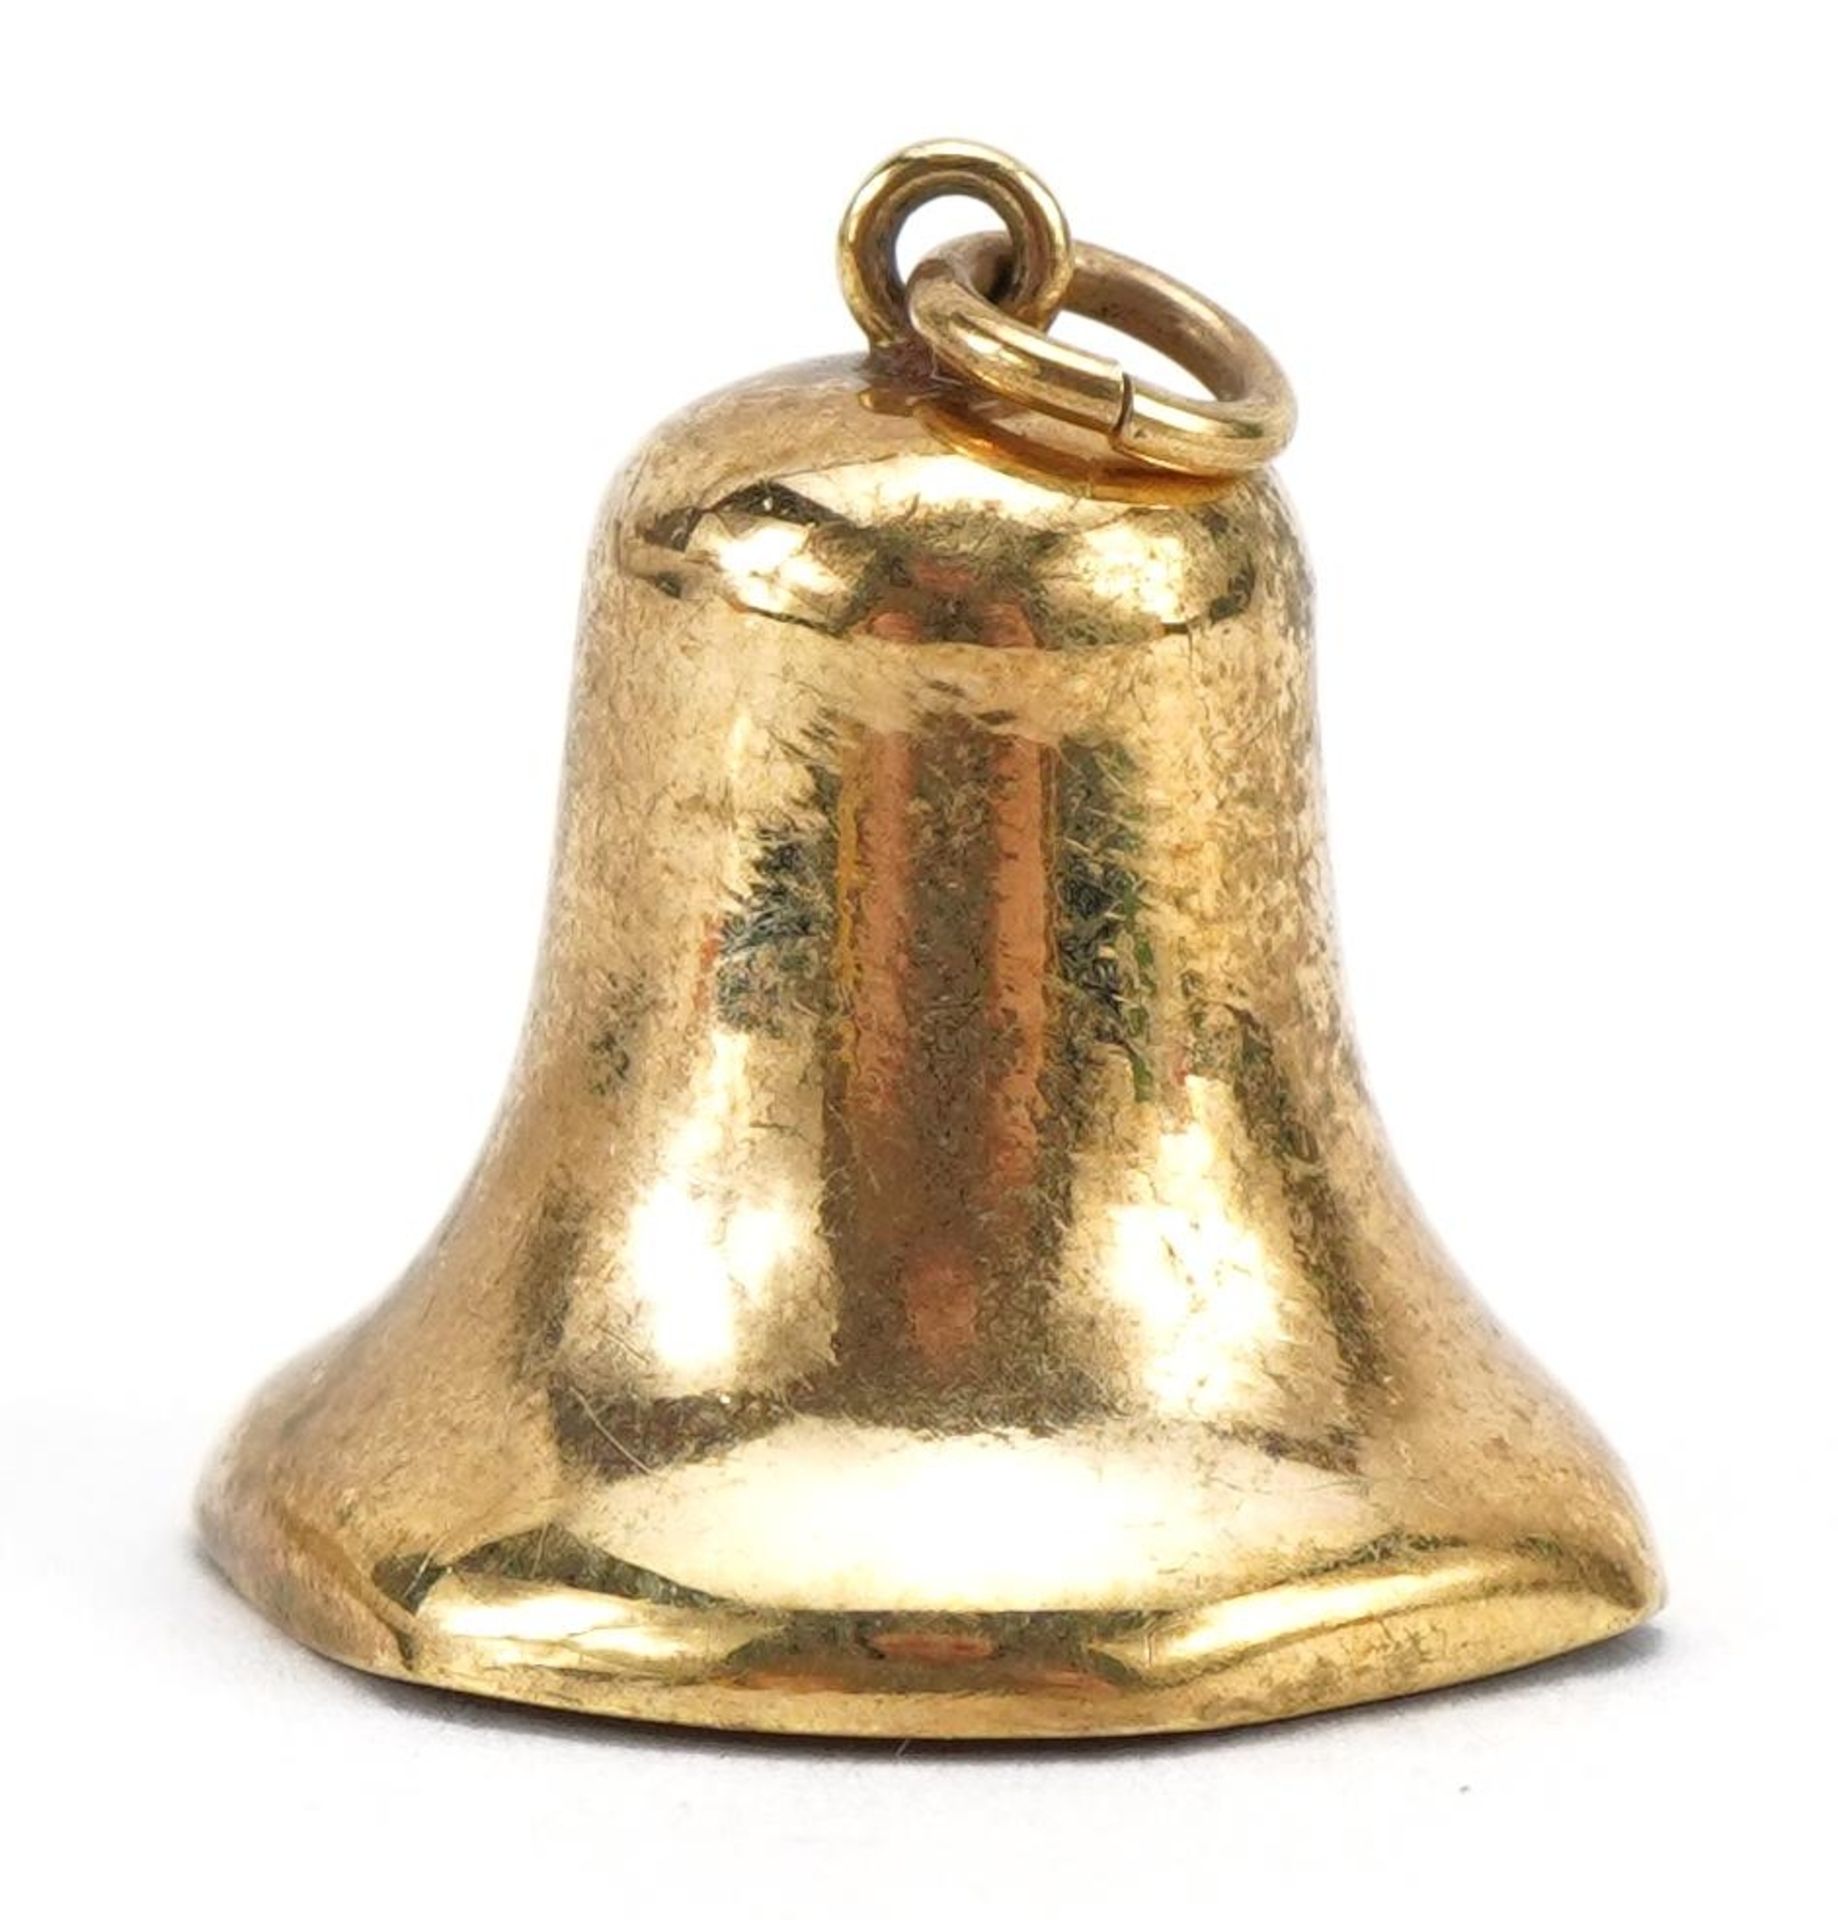 9ct gold bell charm, 1.8cm high, 1.3g : For further information on this lot please contact the